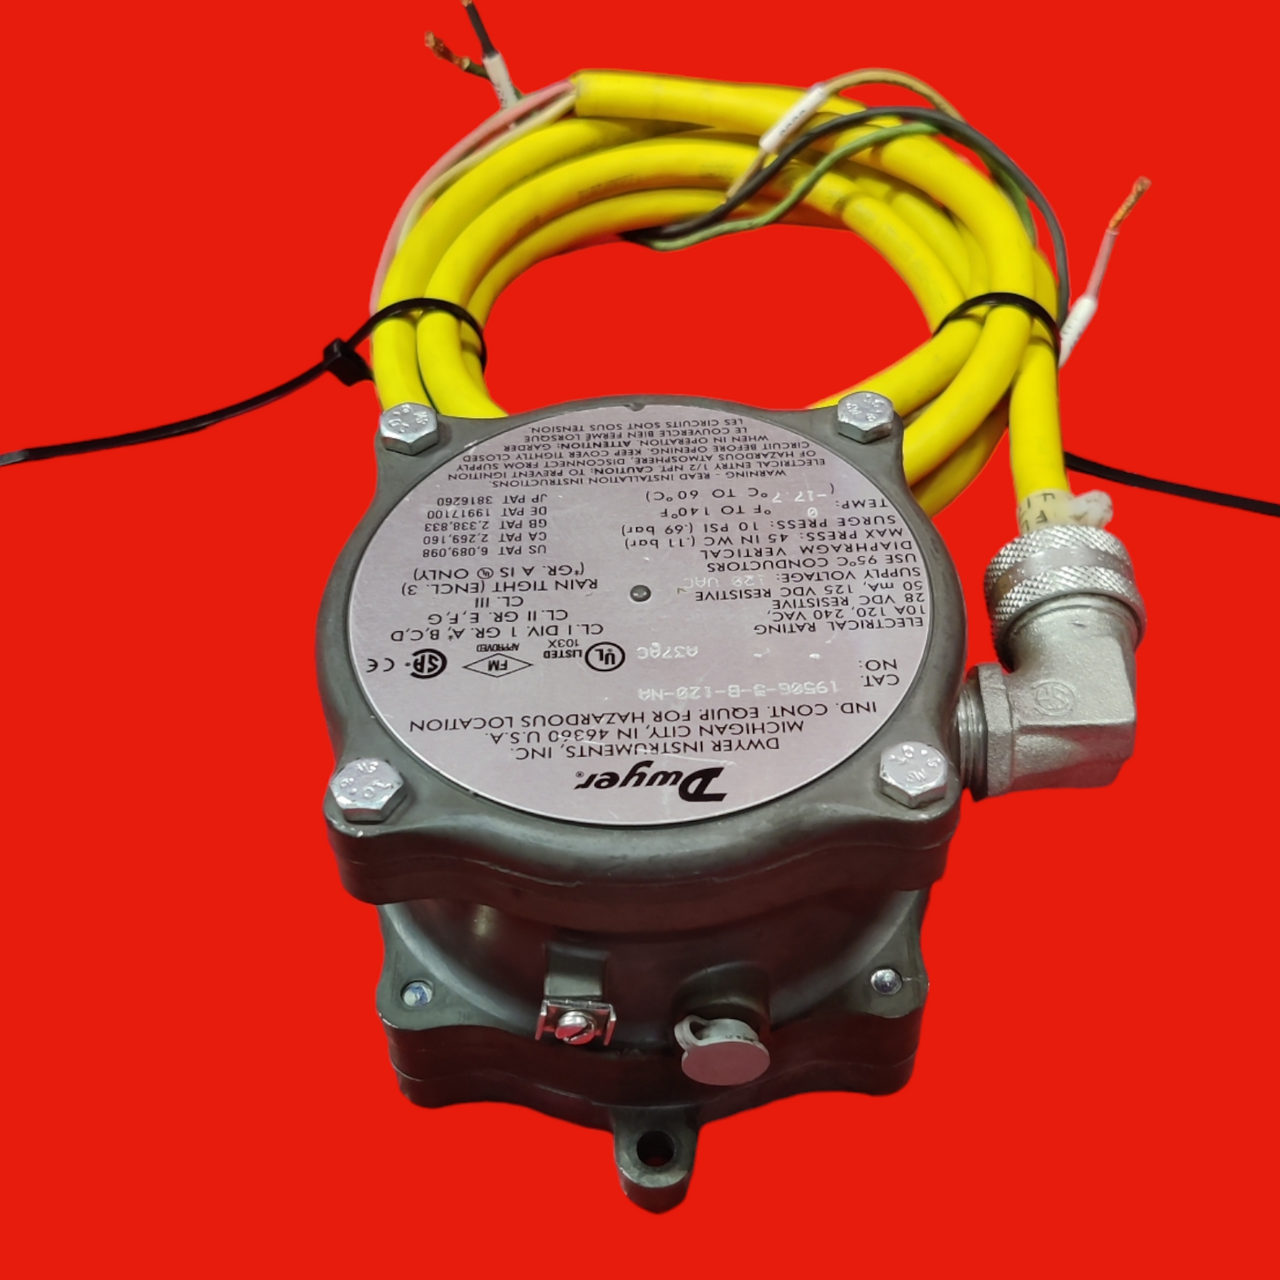 Dwyer Series 1950G Explosion-Proof Differential Pressure Switch, Range 1.4-5.5" w.c.,  1950G-5-B-120-NA